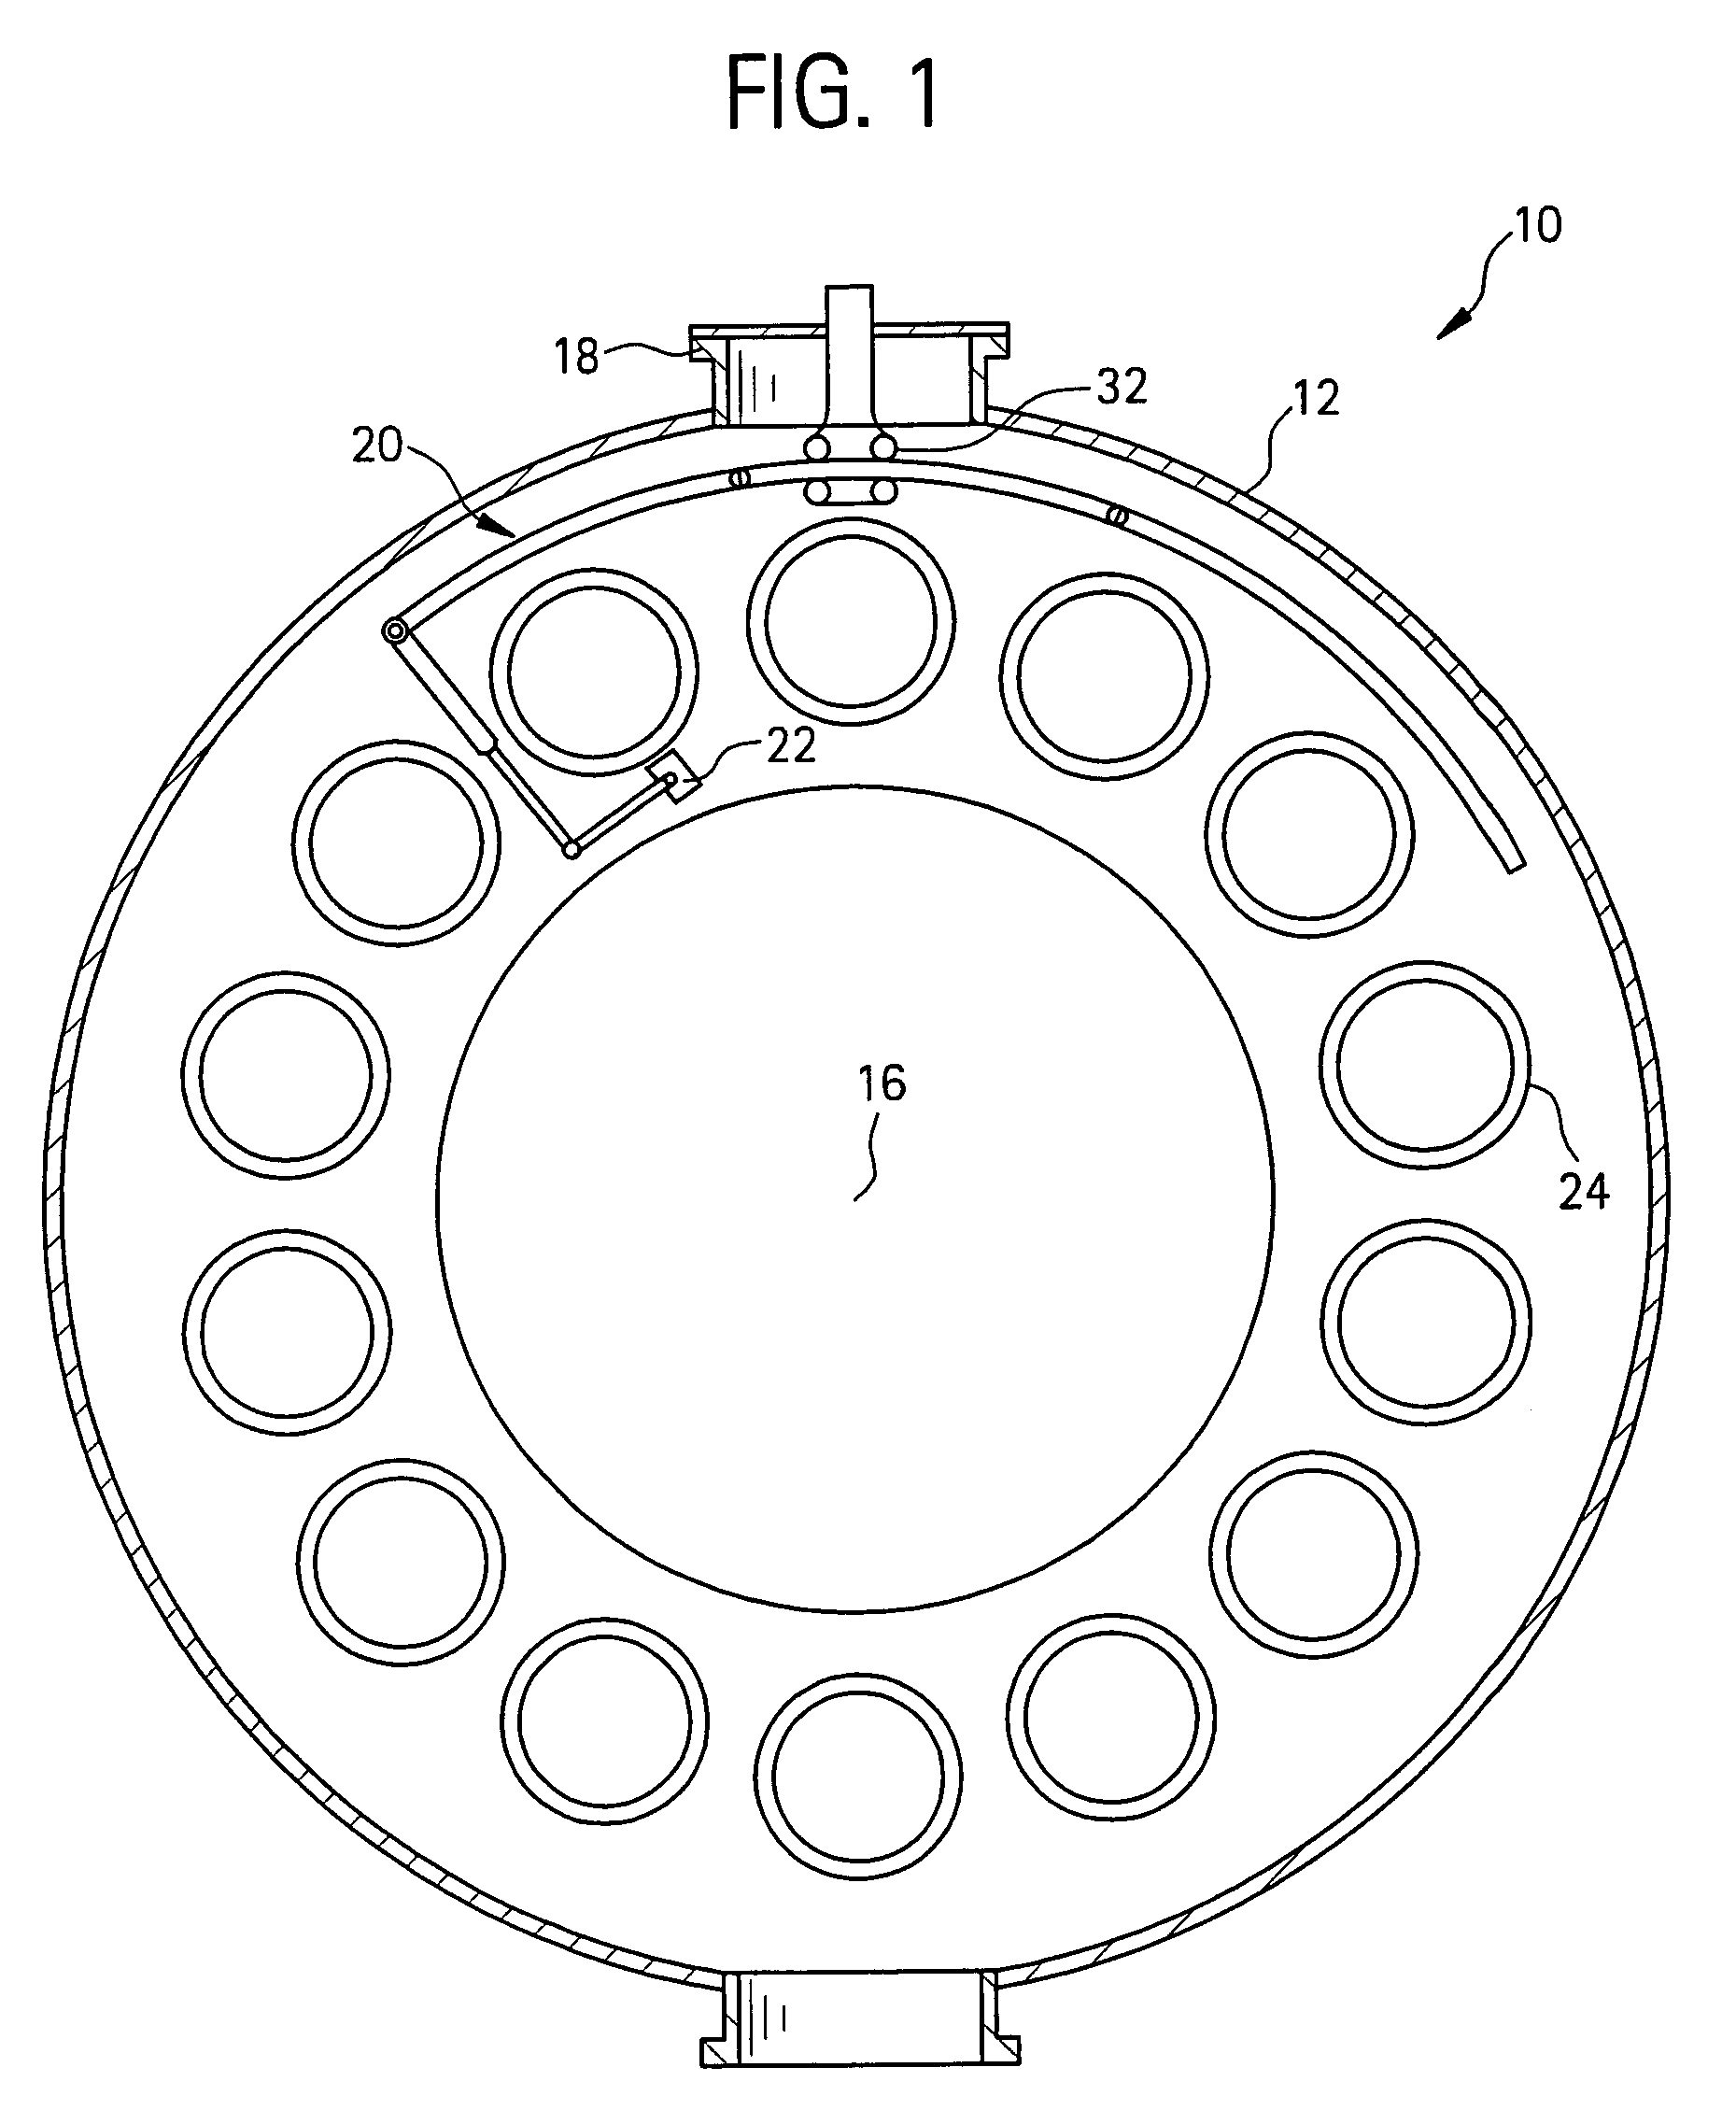 Imaging system for robotically inspecting gas turbine combustion components